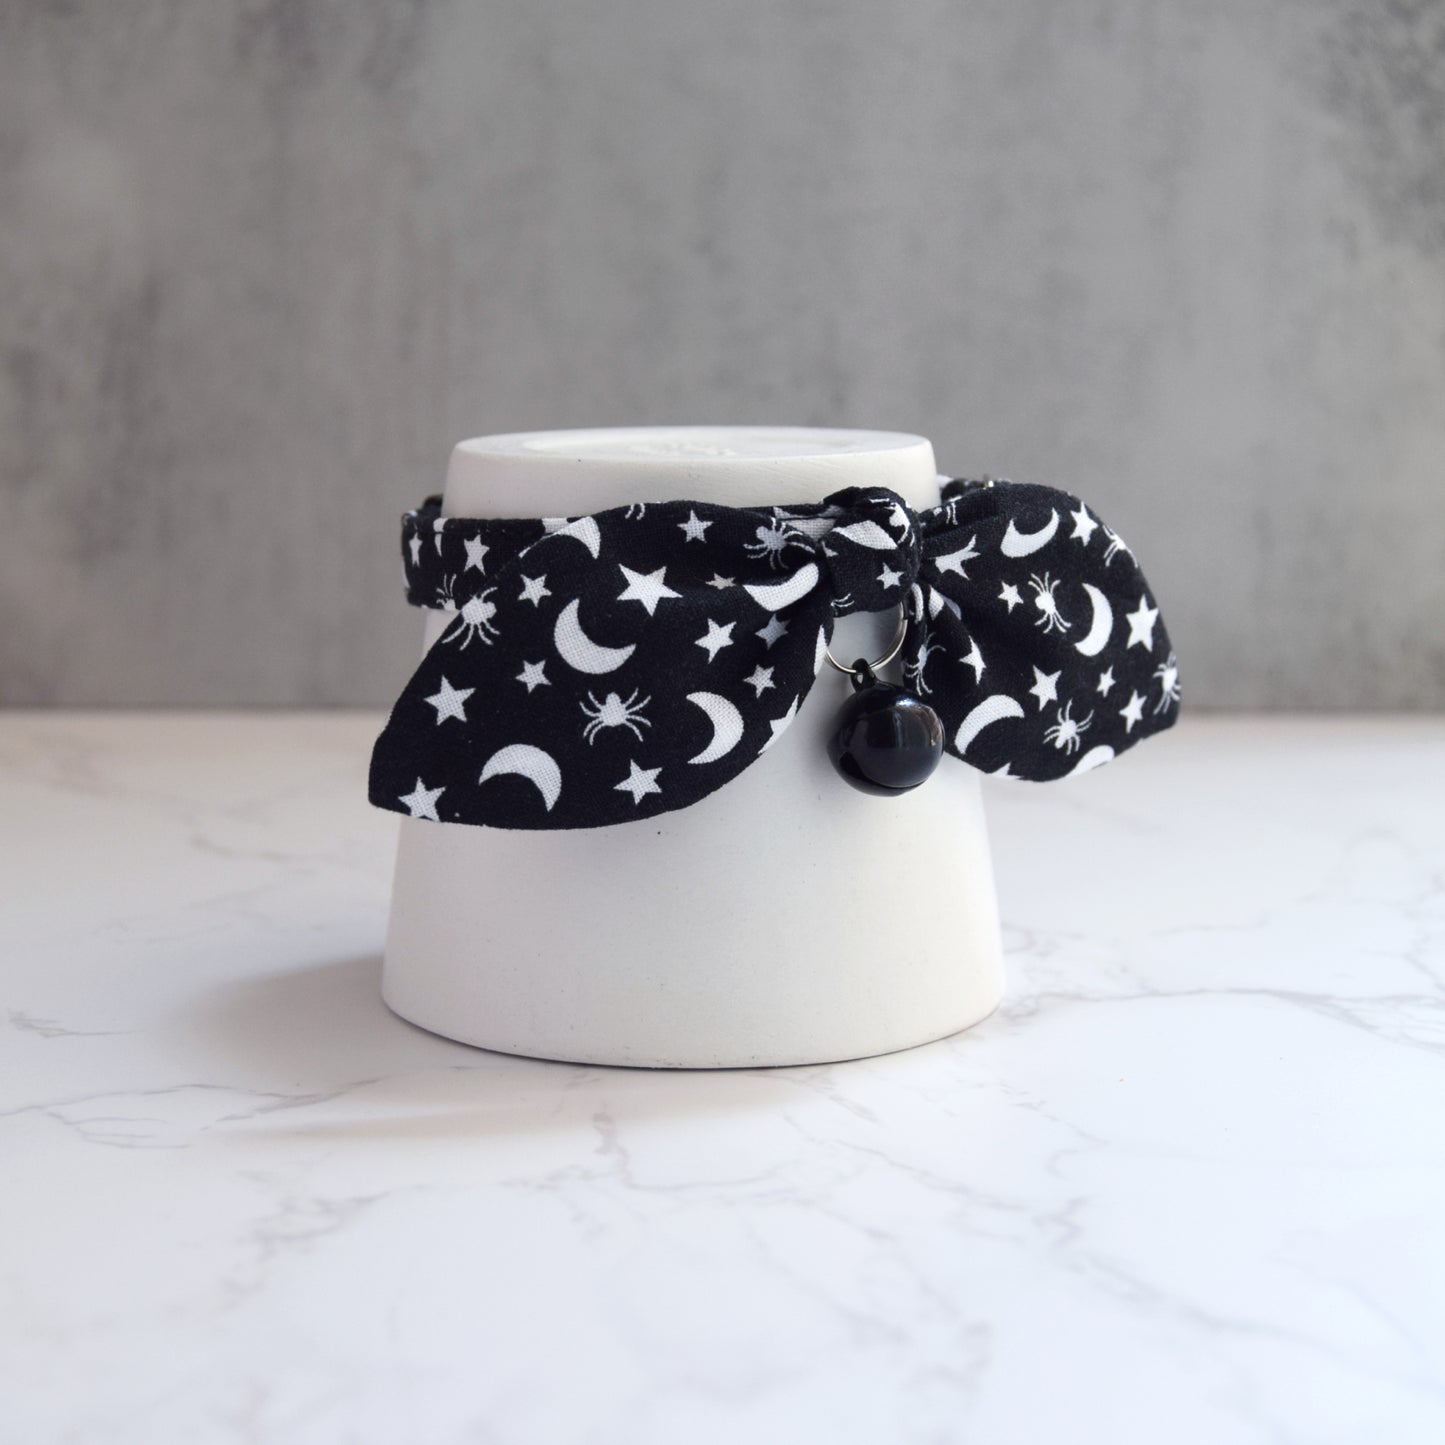 Moon and Spiders Bow Cat Collar